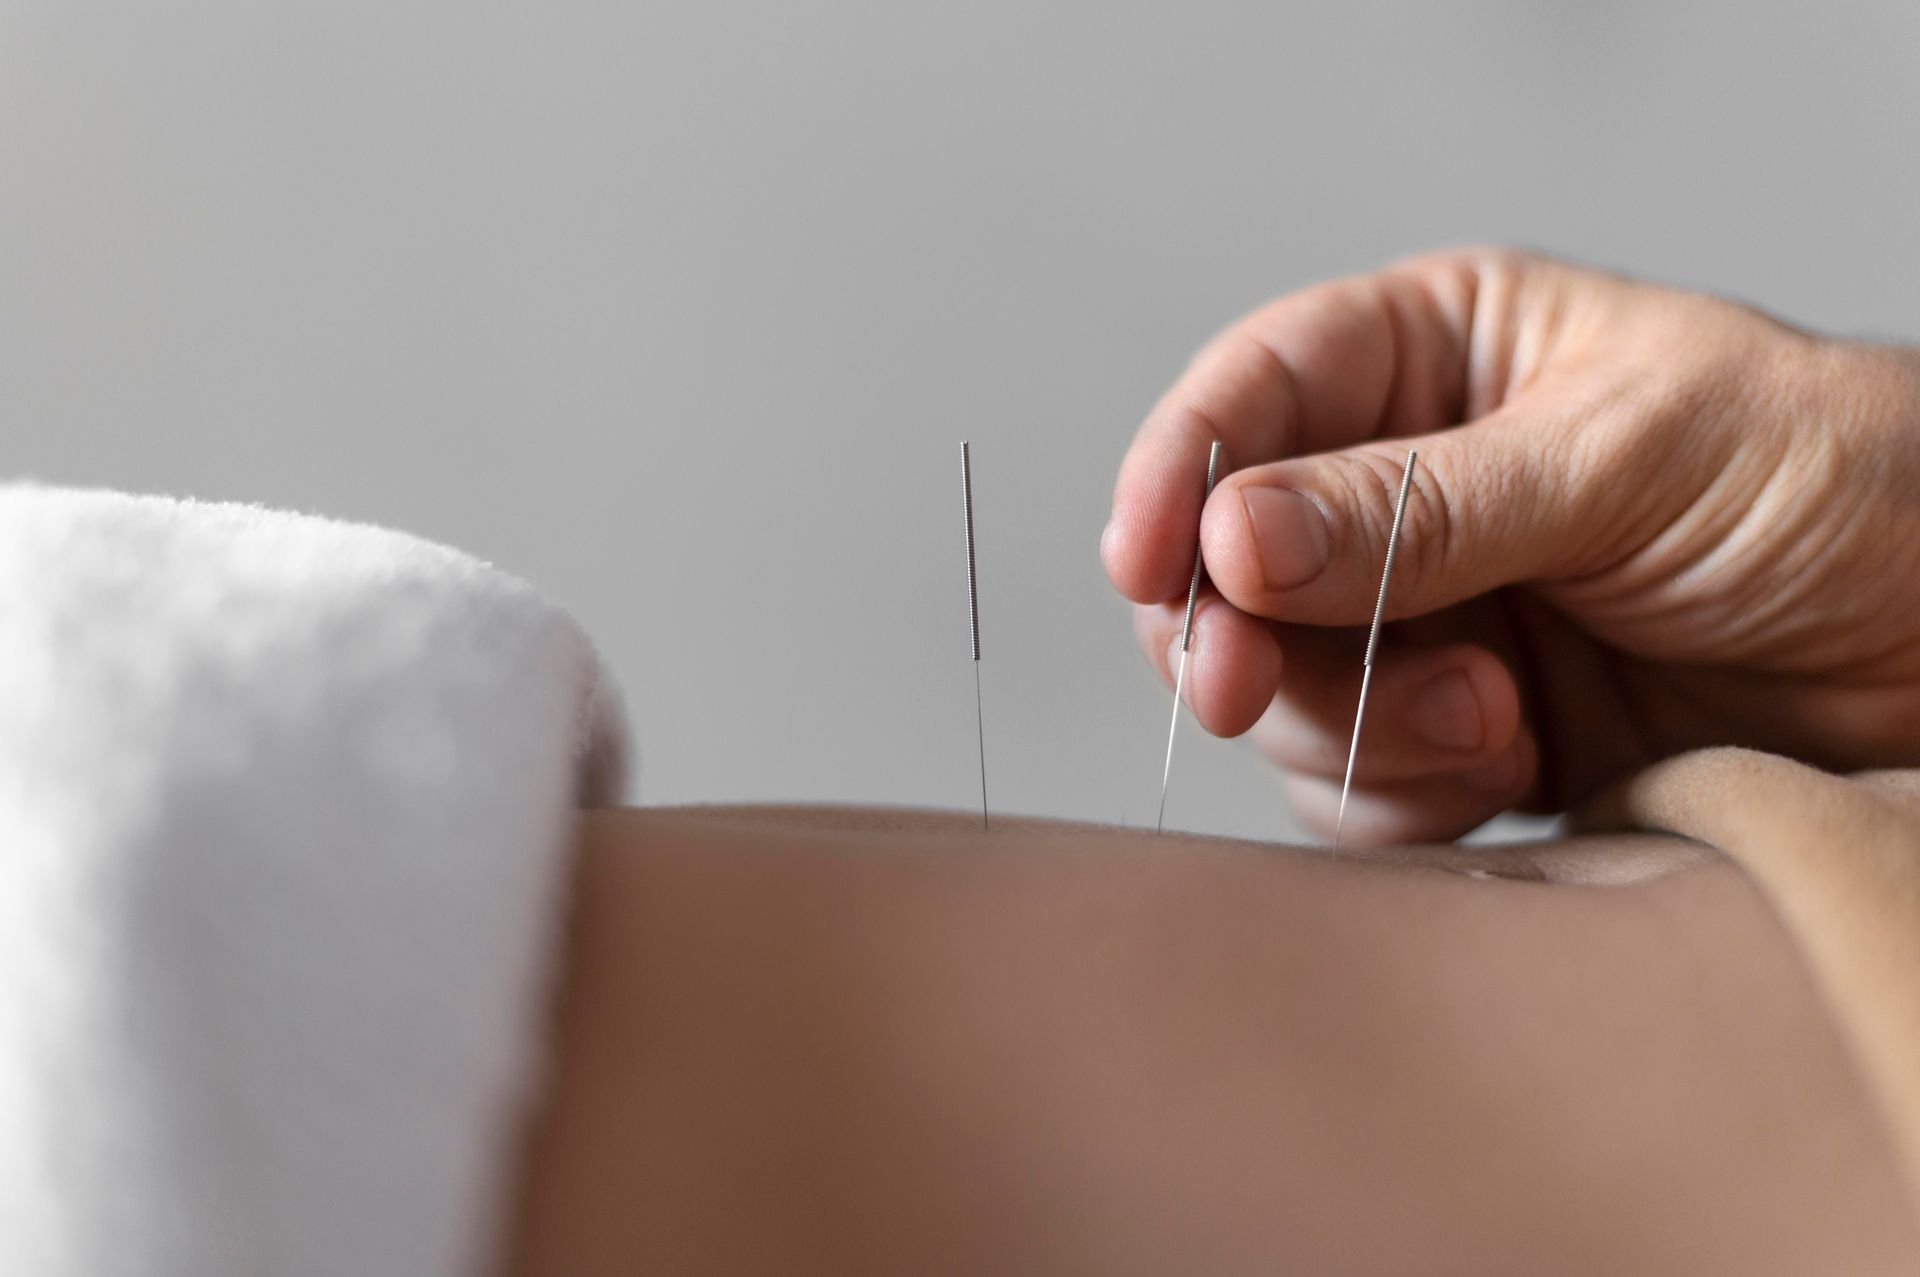 a person is getting acupuncture on their back